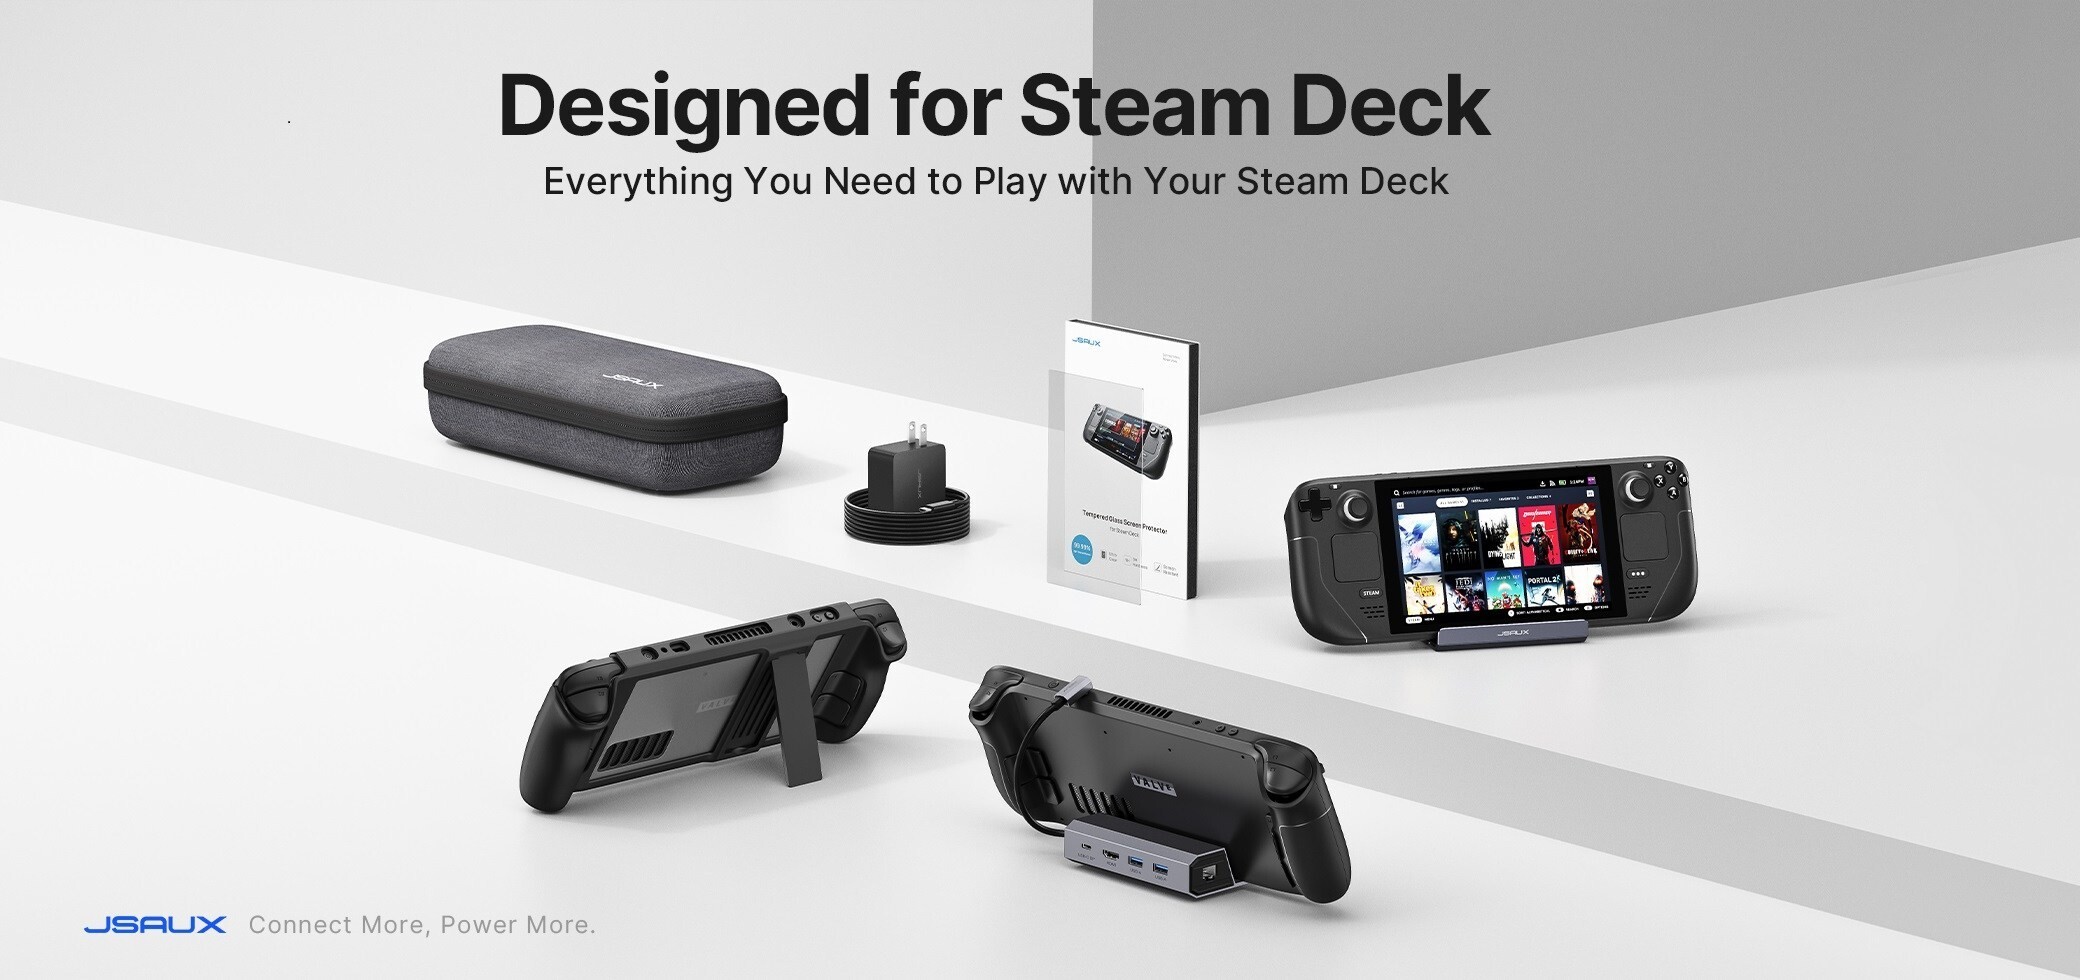 JSAUX Launches its Line of Steam Deck Accessories